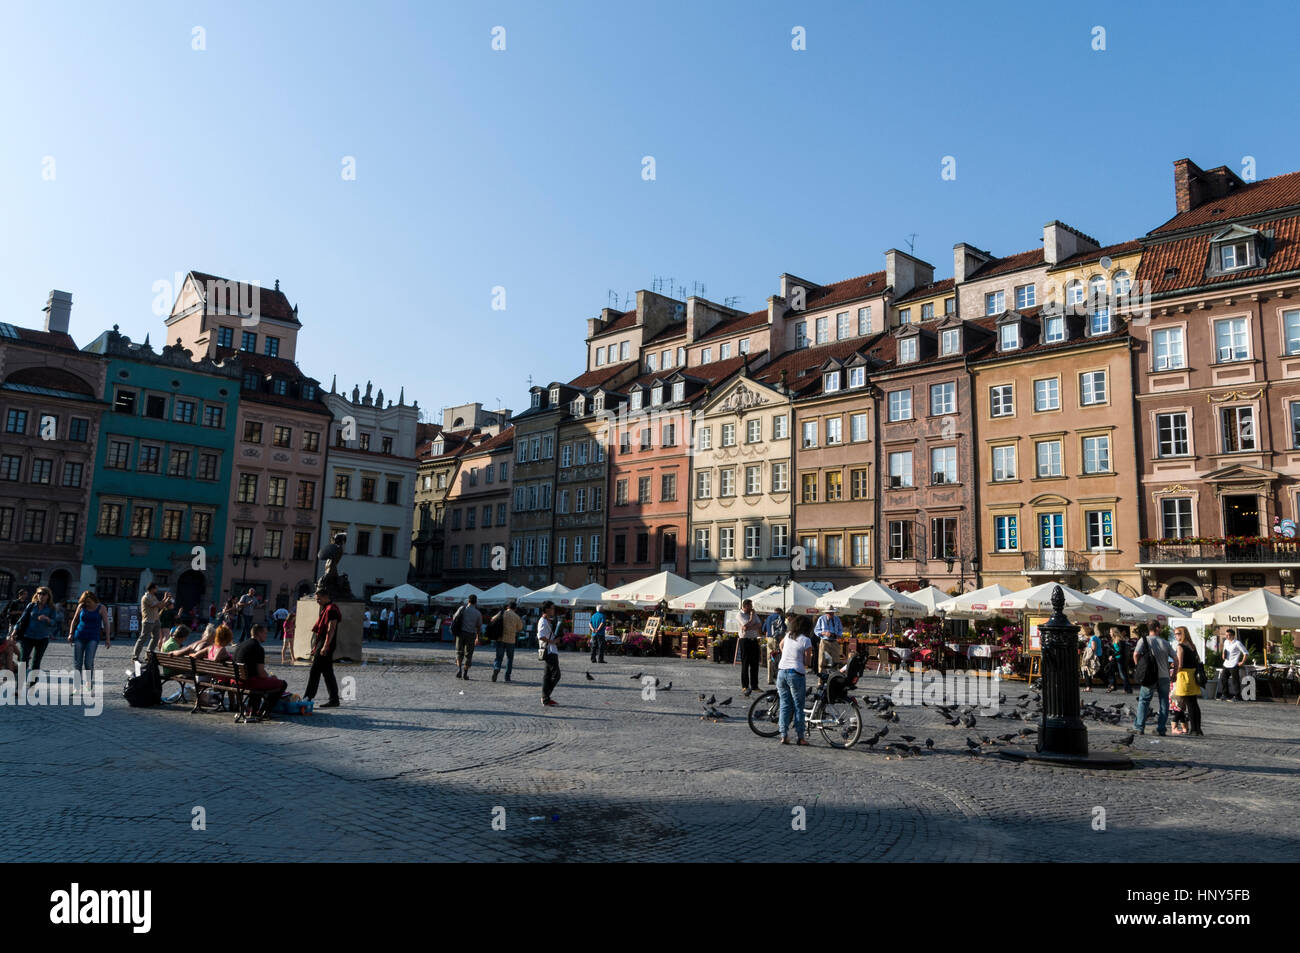 Warsaw's Old Town Market Place is a main square surrounded with restaurants, cafes and souvenir shops. The buildings are of a mix of Gothic,Renaissanc Stock Photo